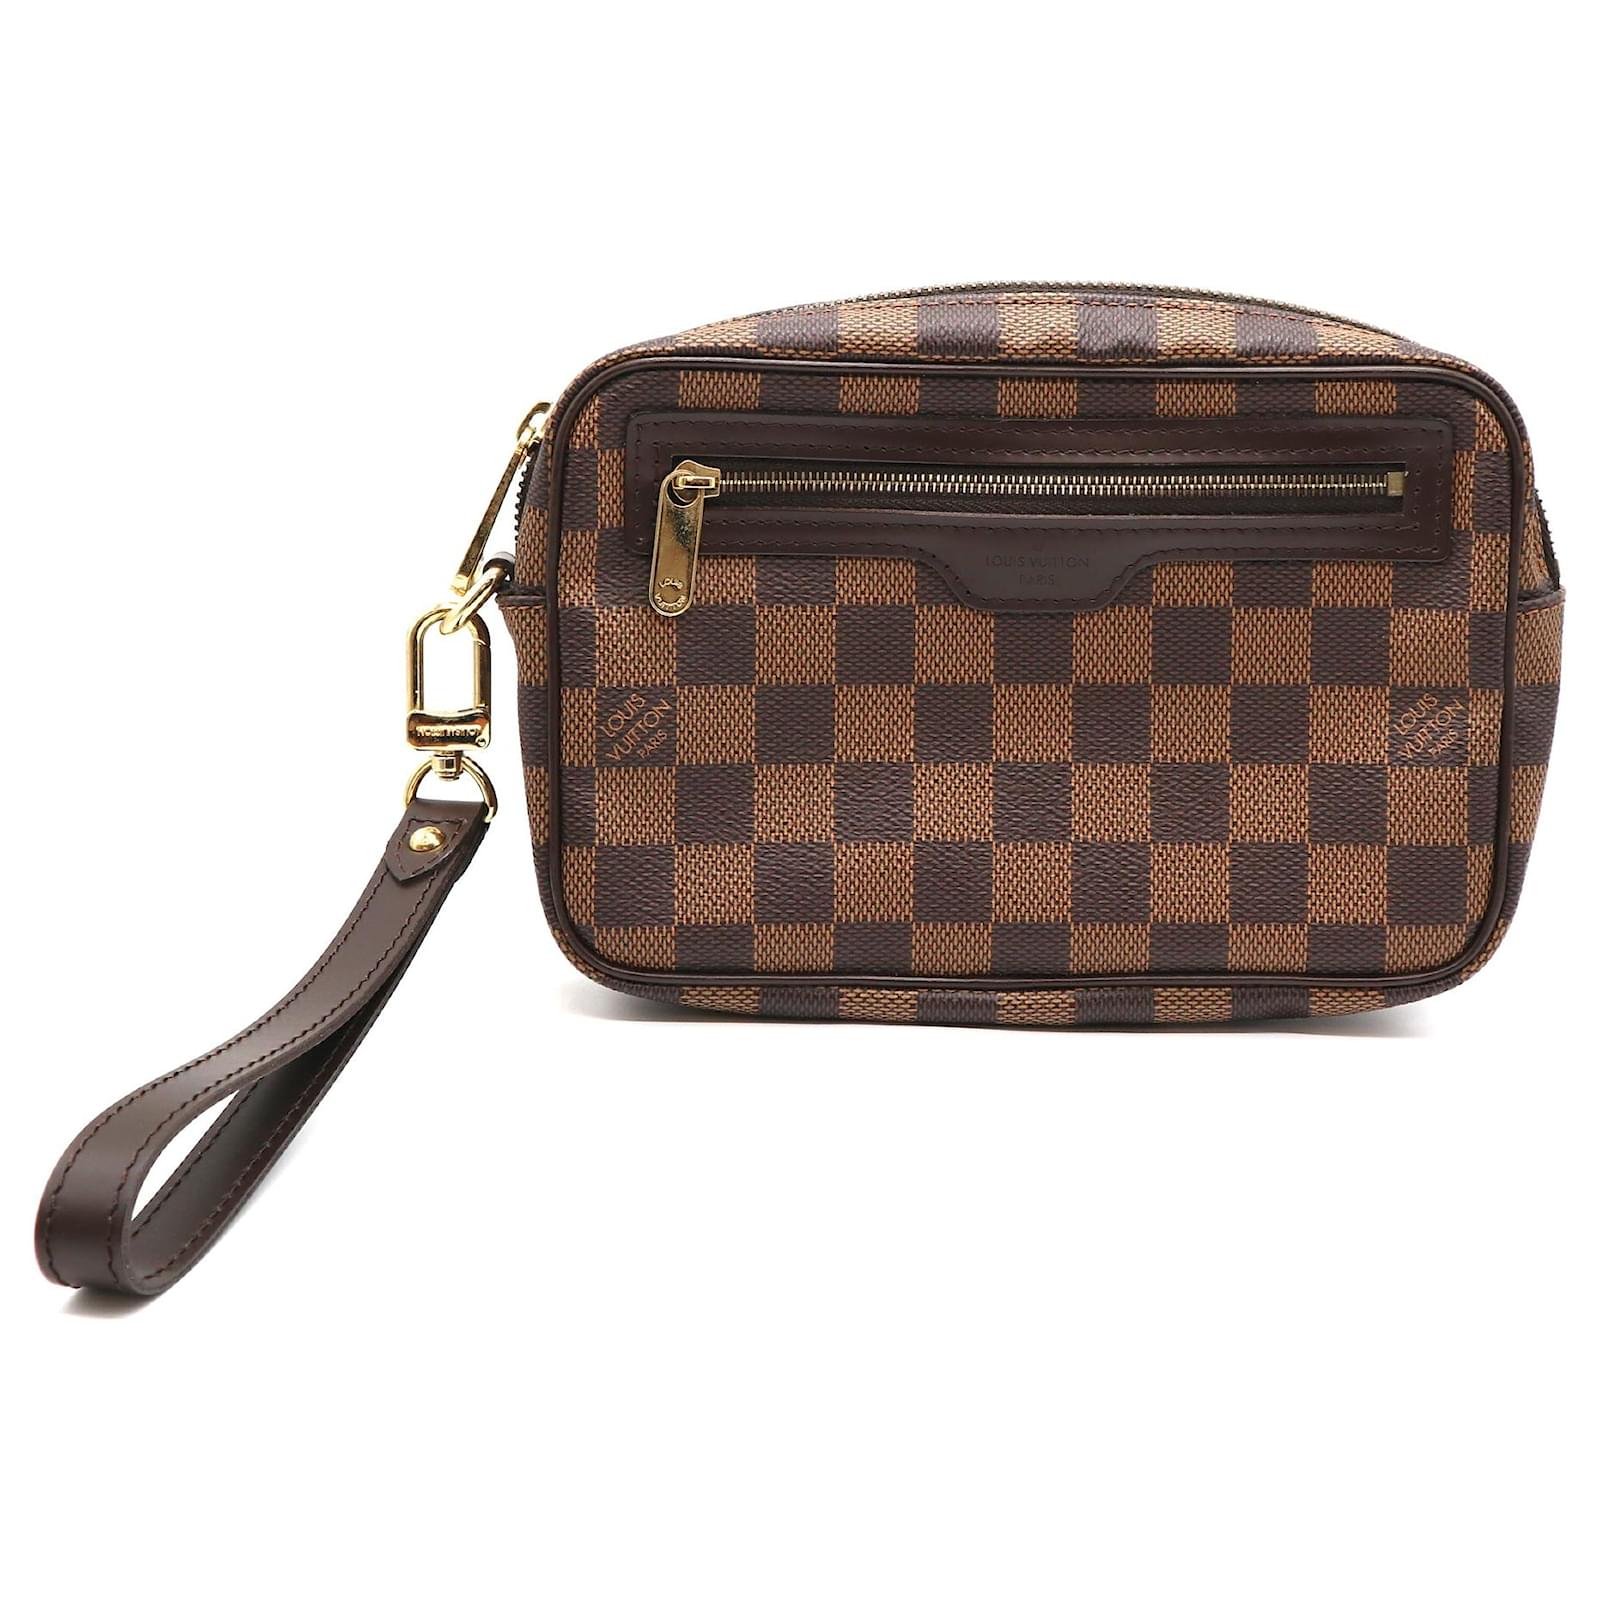 Authentic Louis Vuitton Damier Ebene Canvas with Brown Leather